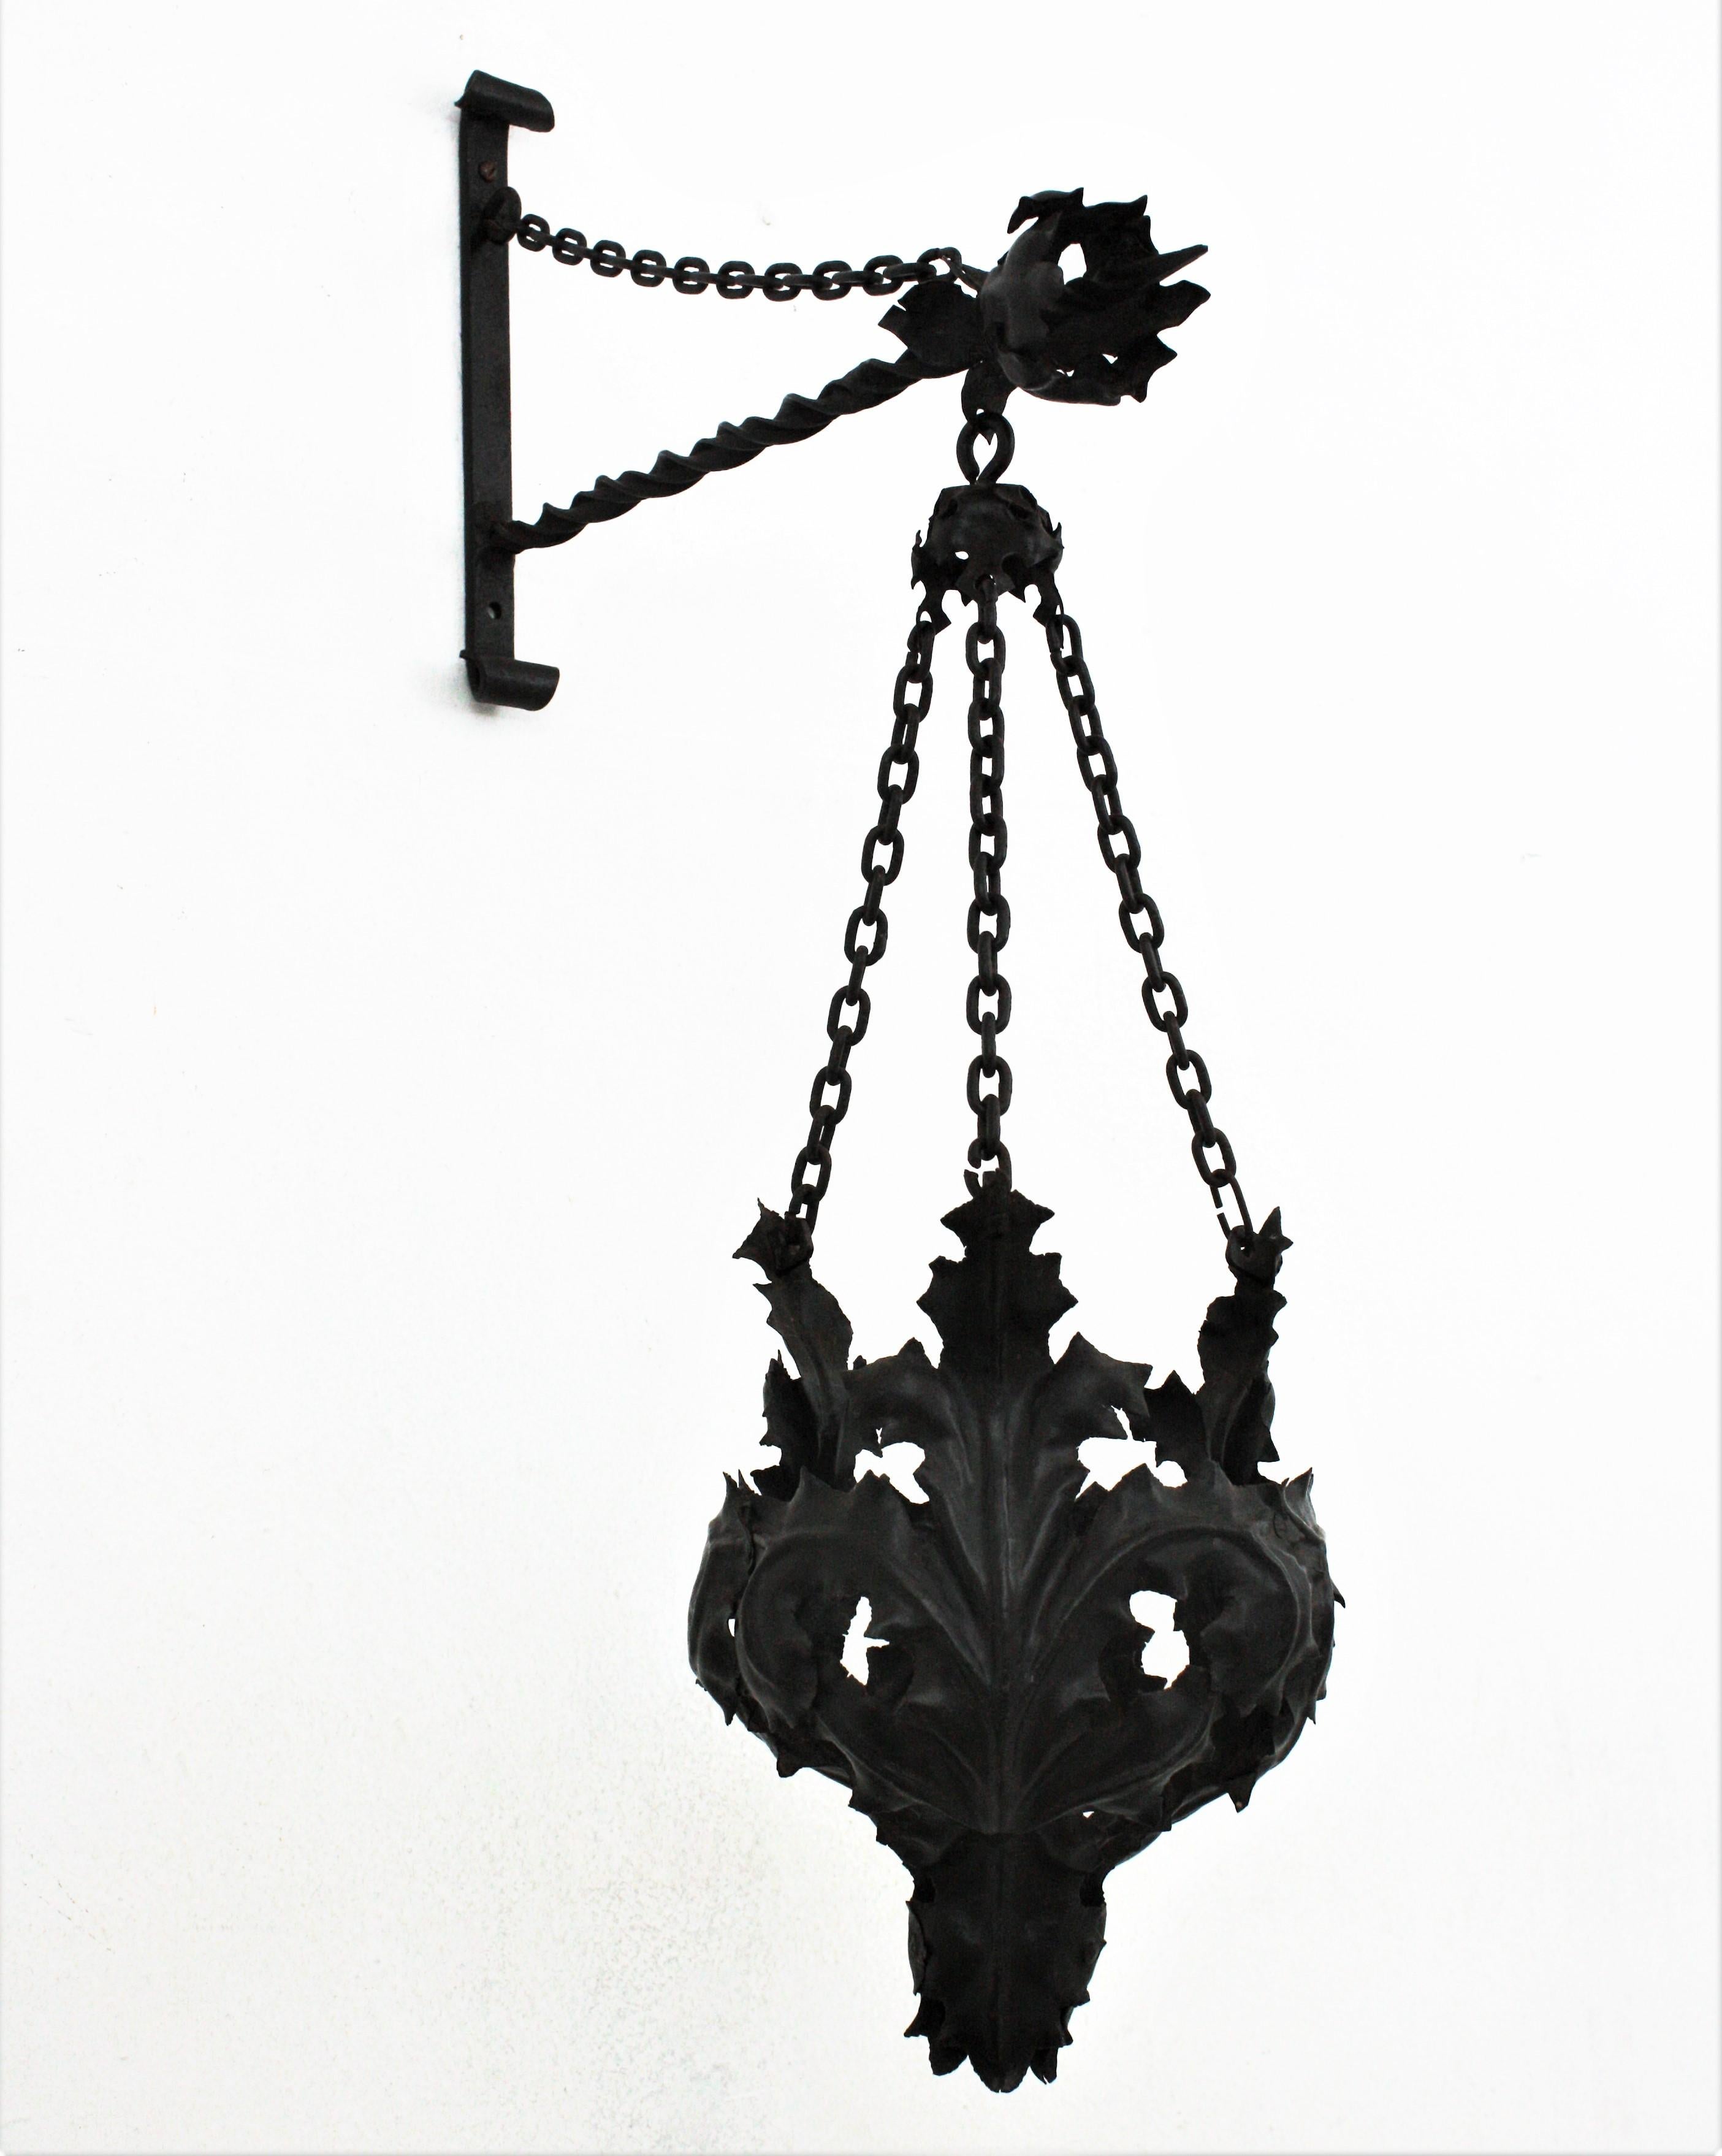 Eye-catching hand-hammered iron leafed wall hanging planter / basket in the style of Gothic, Spain, 1920s-1930s.
This hanging planter is all made by hand. The basket planter is made of iron leaves that hangs from three chains from a wall bracket